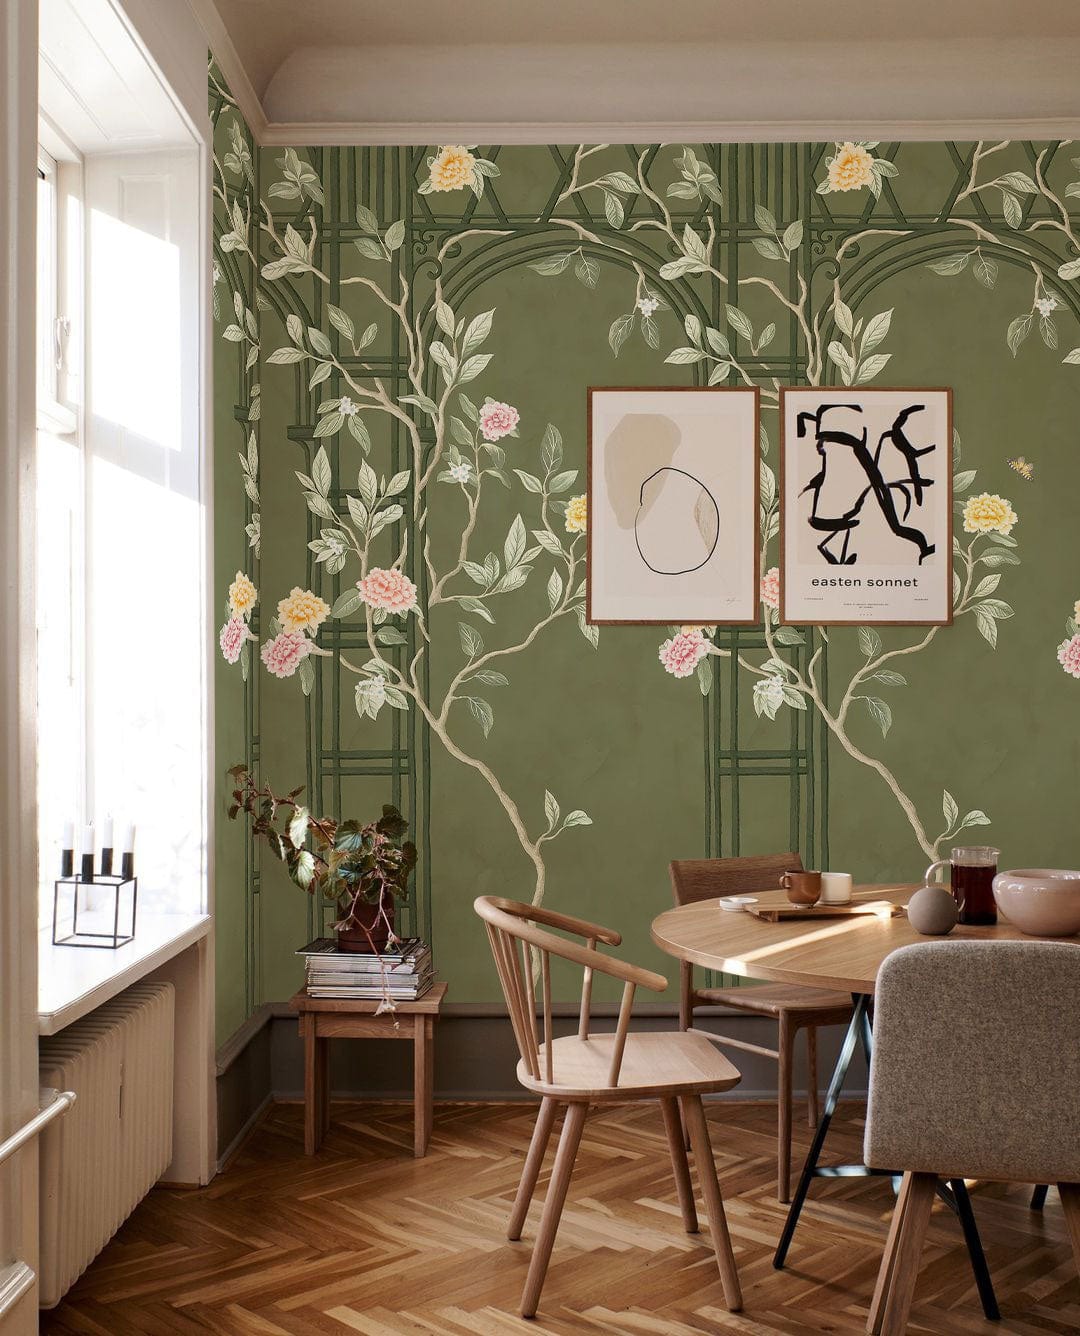 Wallpaper mural featuring a flowering vine and vine fence, perfect for decorating the dining room.